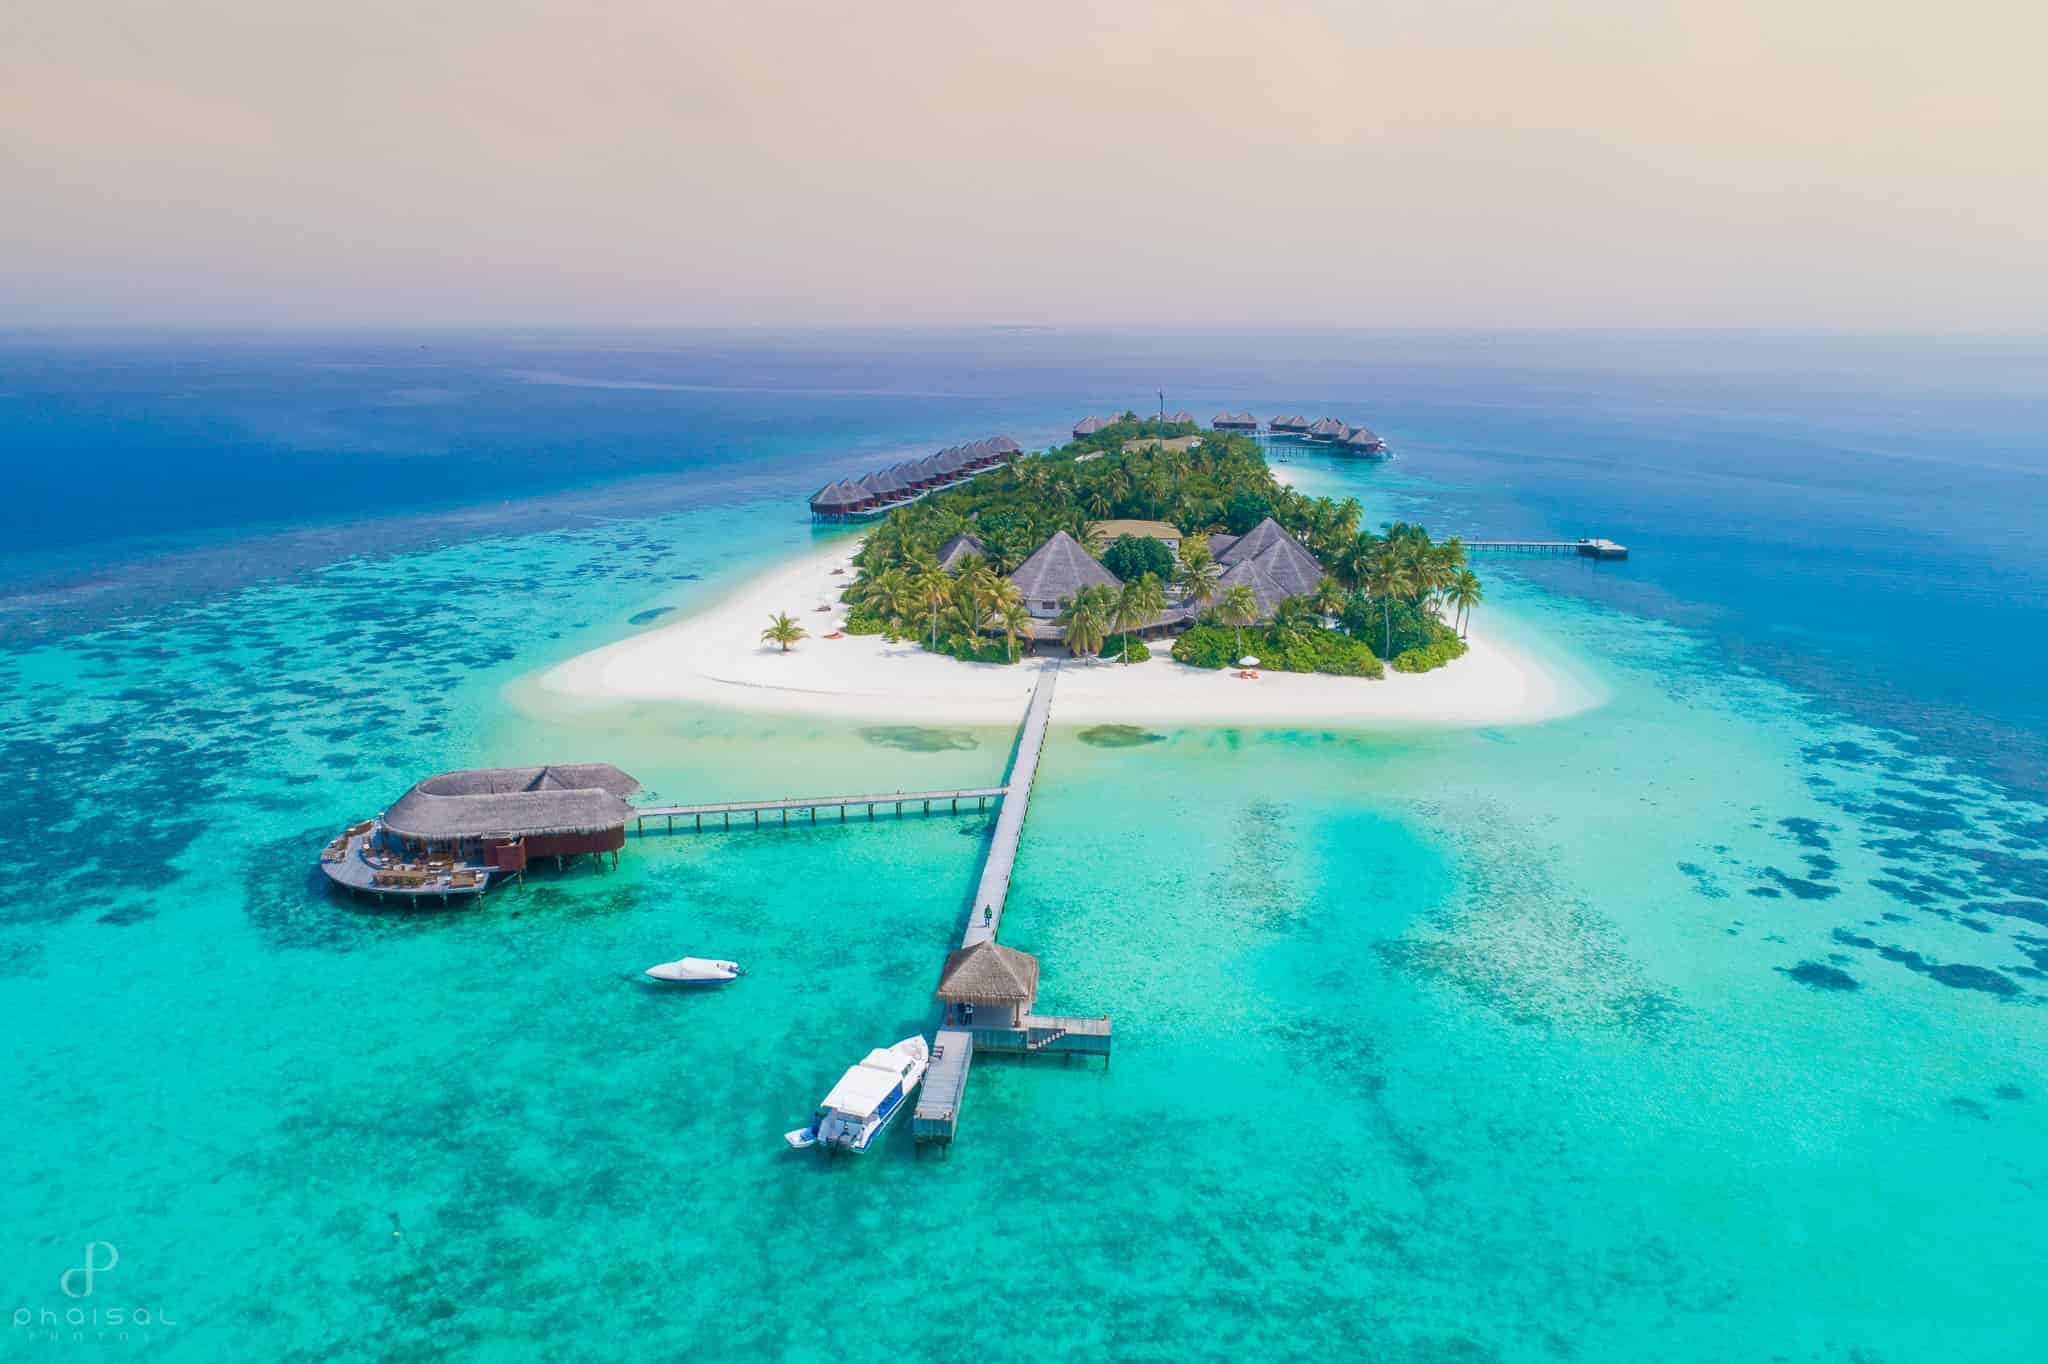 10 Maldives travel tips you must keep in mind before planning a trip